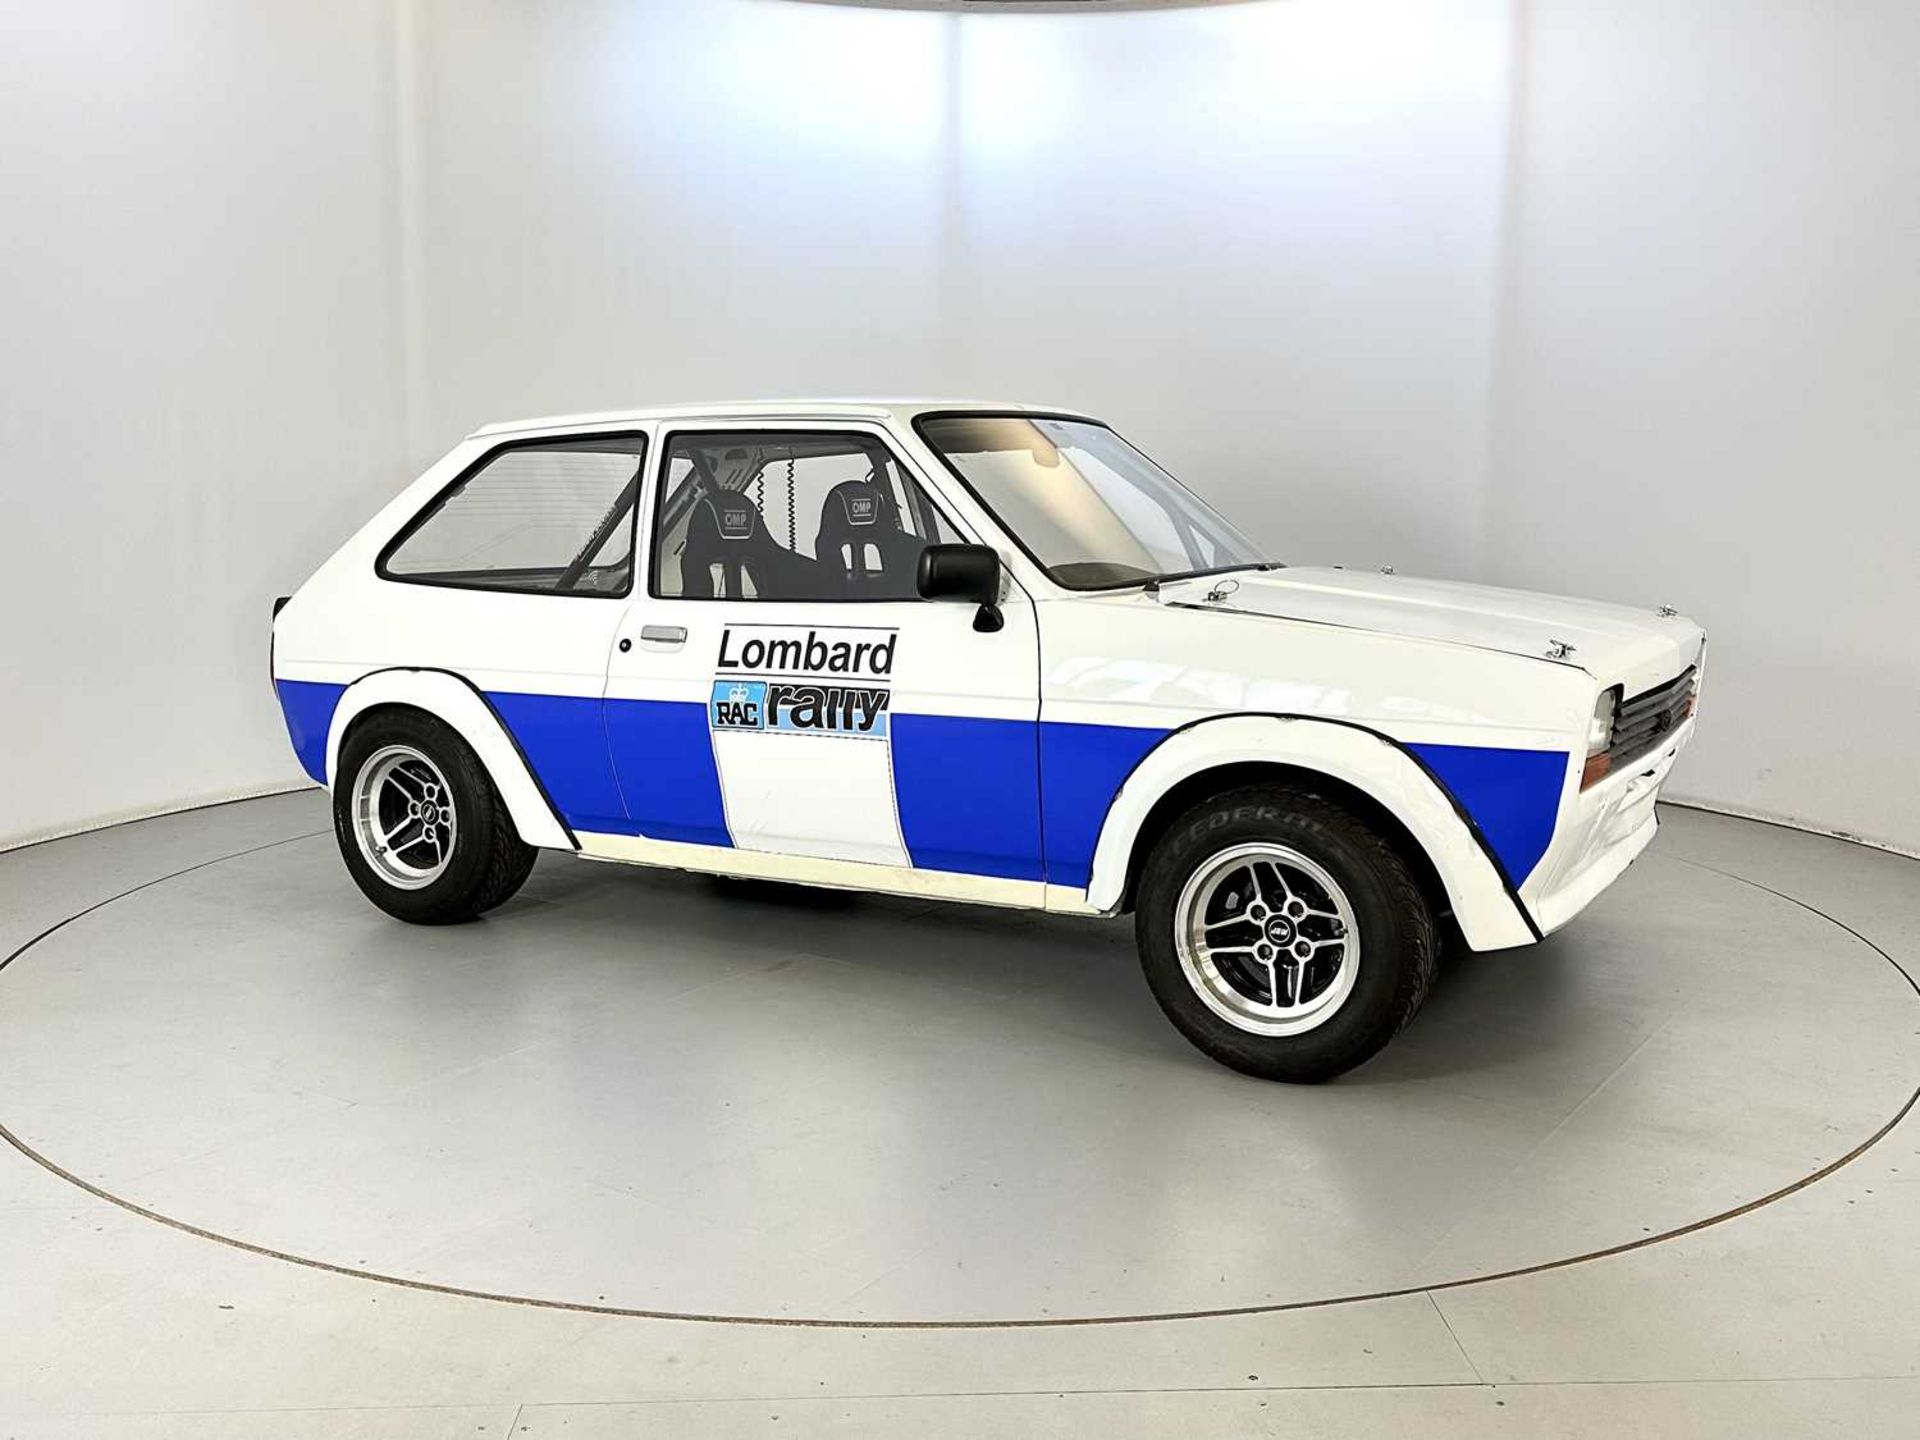 1983 Ford Fiesta XR2 - Image 12 of 28